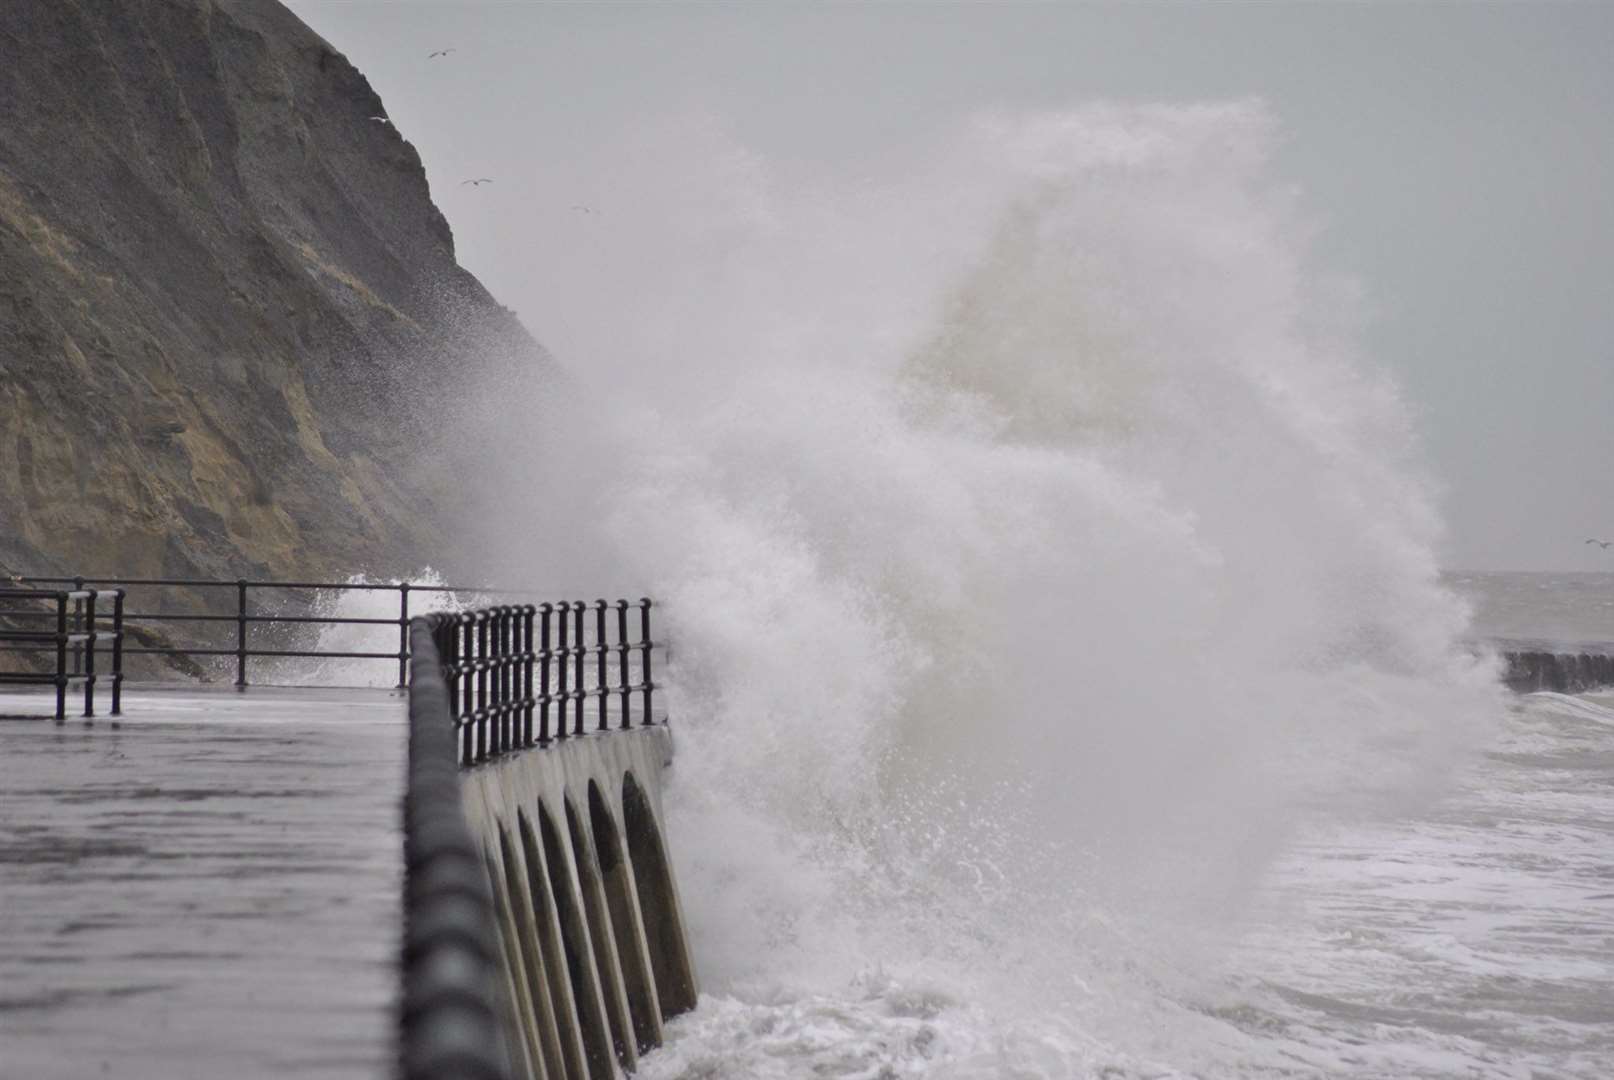 Big waves will hit the coastline today